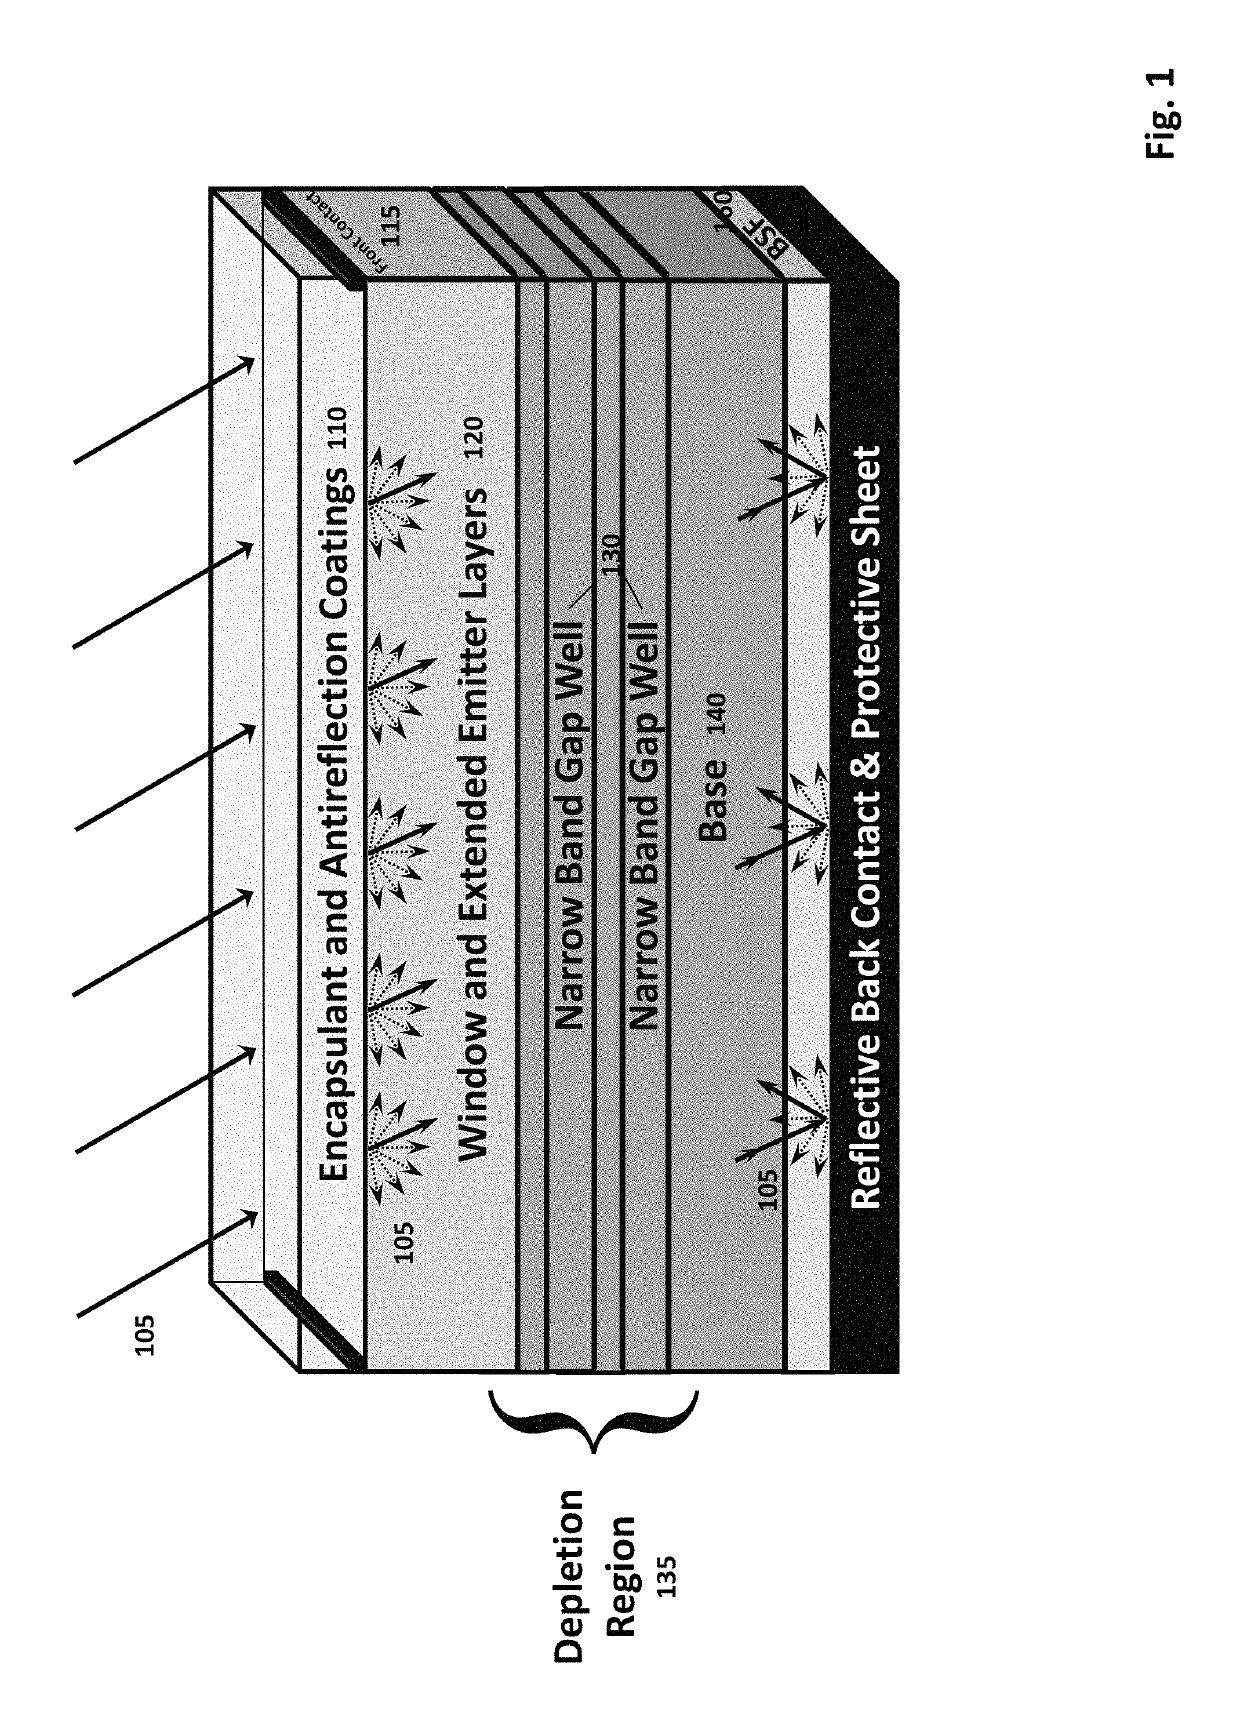 Broadband photovoltaic sheets and method of constructing the same